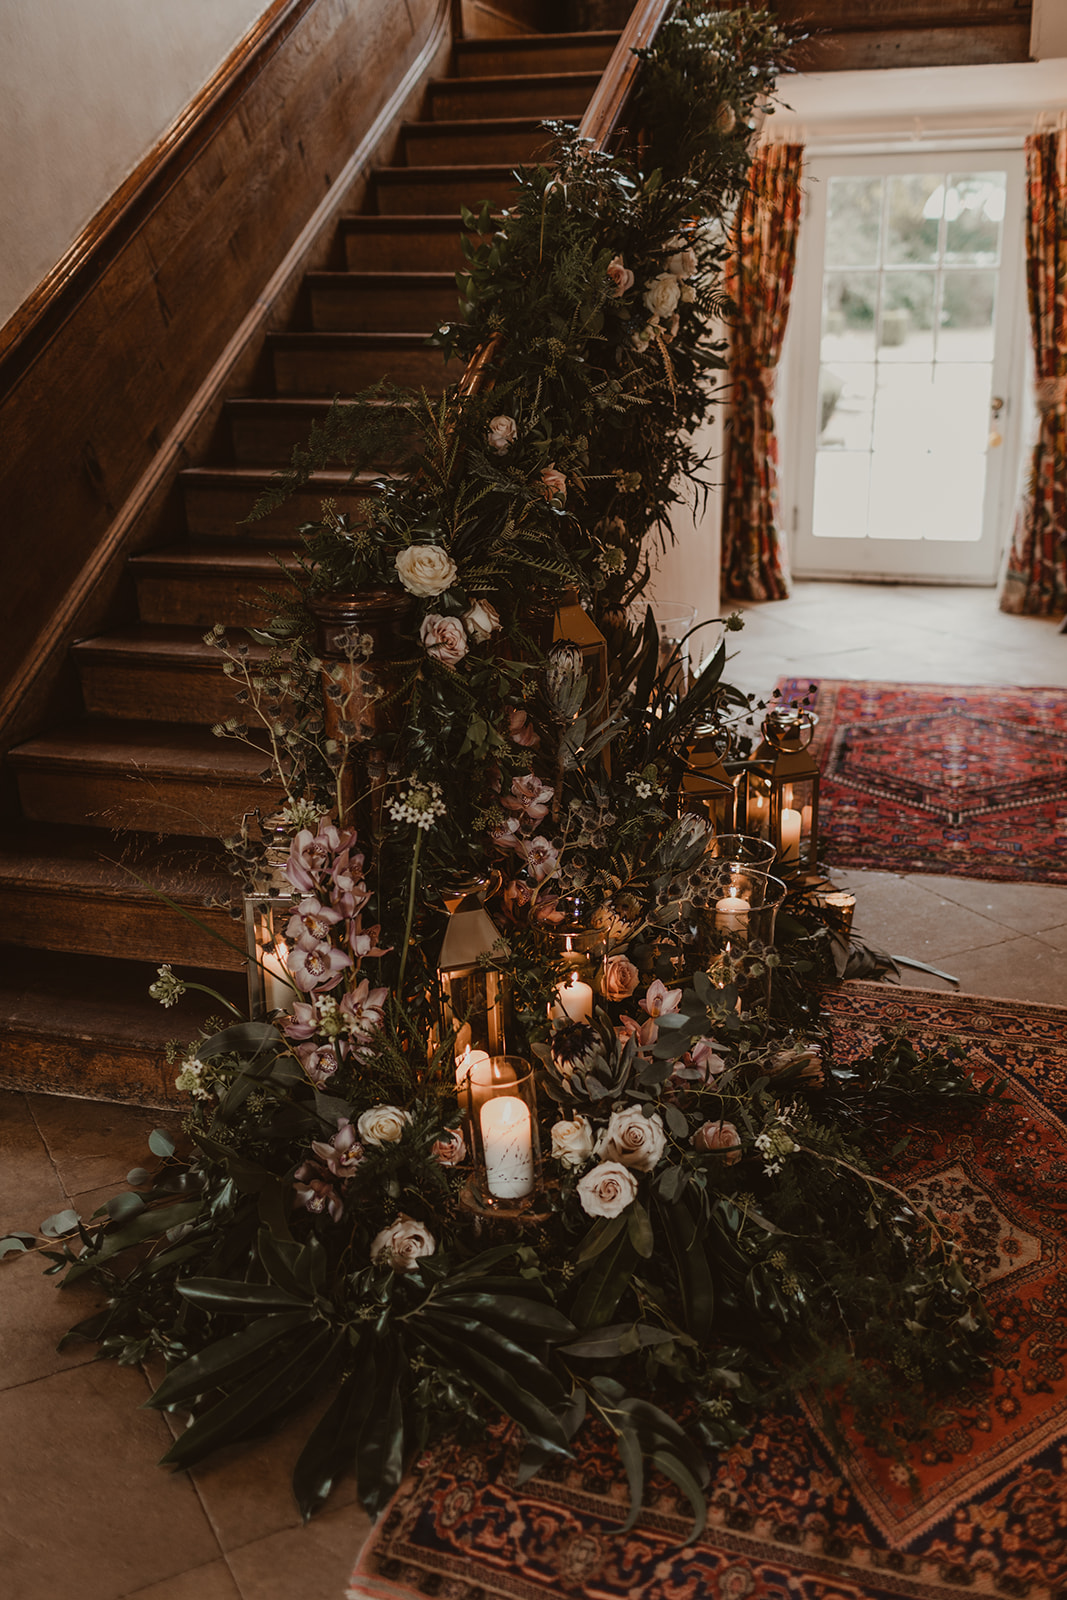 View of the side of an antique wooden staircase that has candles arranged at the bottom and soft pink flowers entwined around the bannister